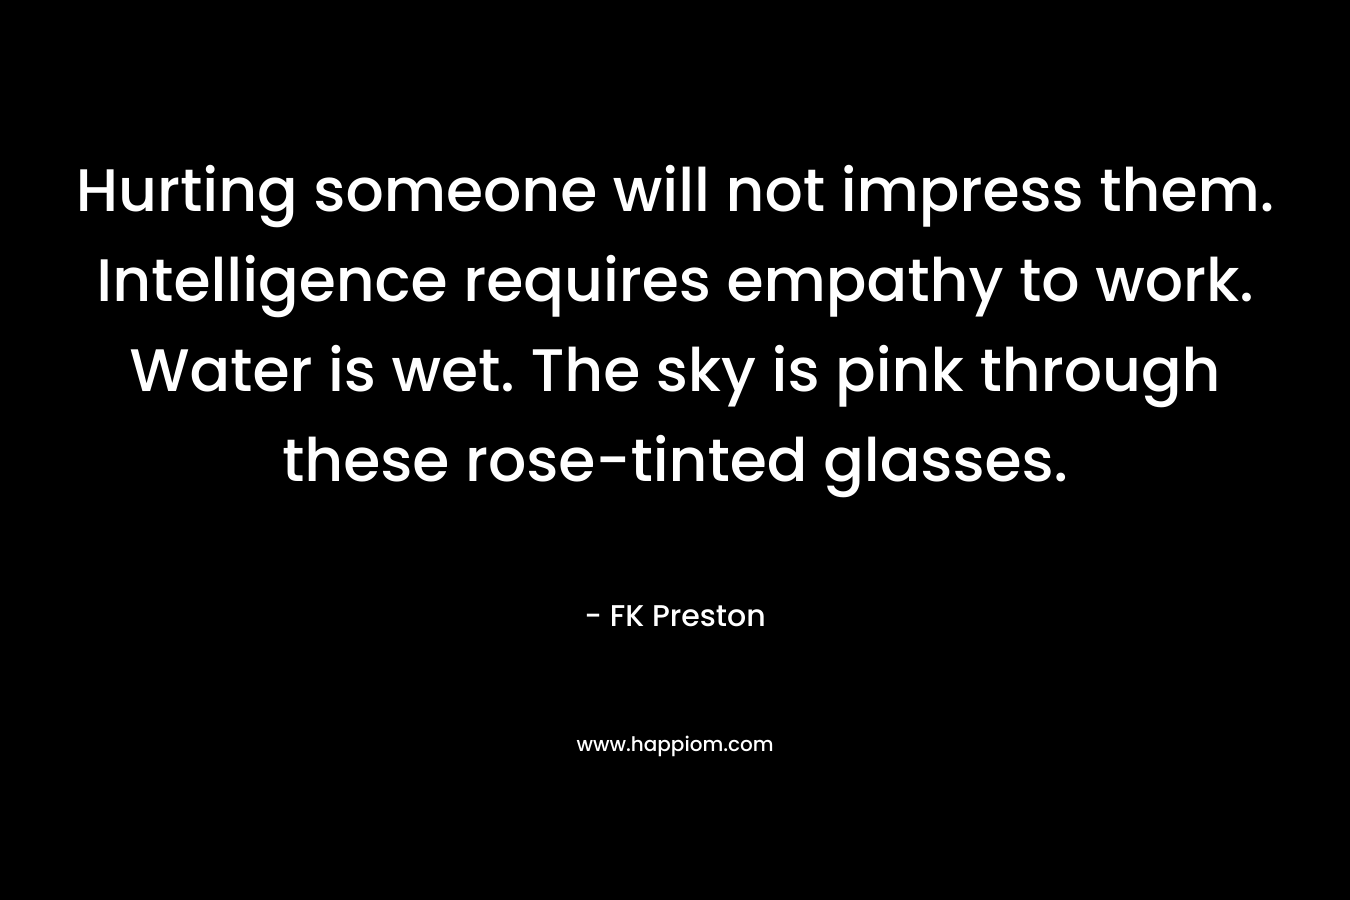 Hurting someone will not impress them. Intelligence requires empathy to work. Water is wet. The sky is pink through these rose-tinted glasses.